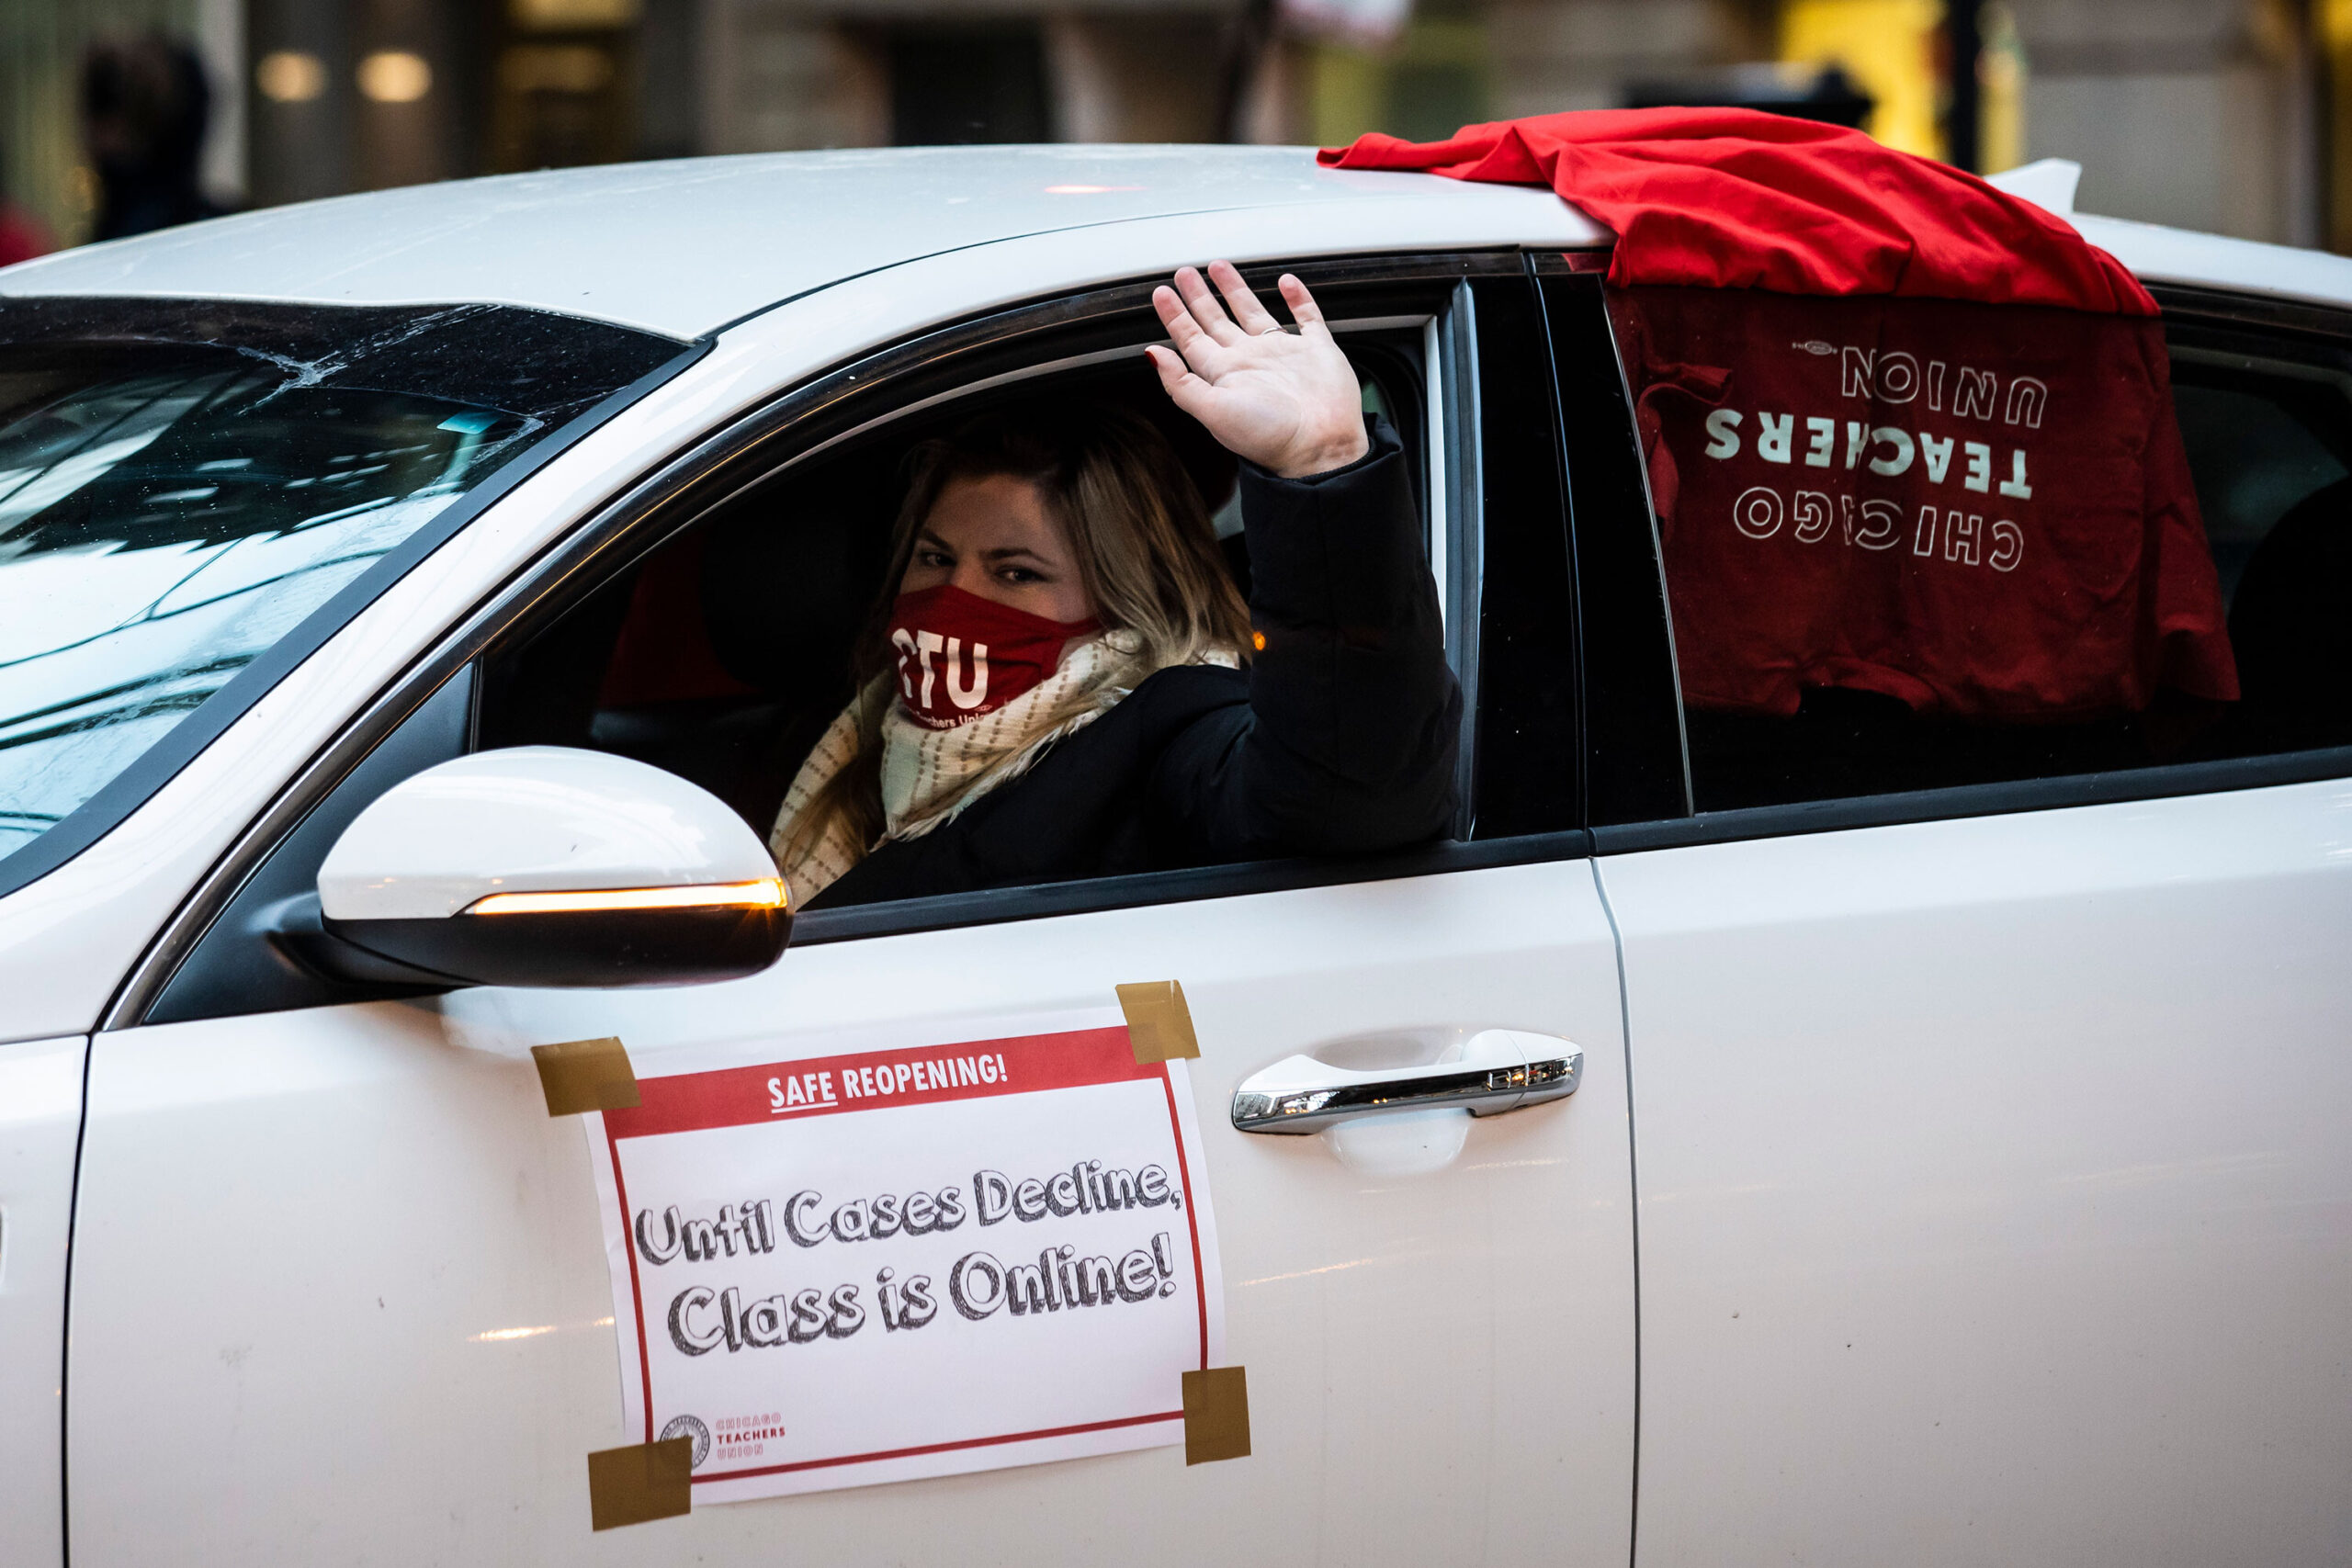 Members of the Chicago Teachers Union and supporters stage a car caravan protest outside City Hall